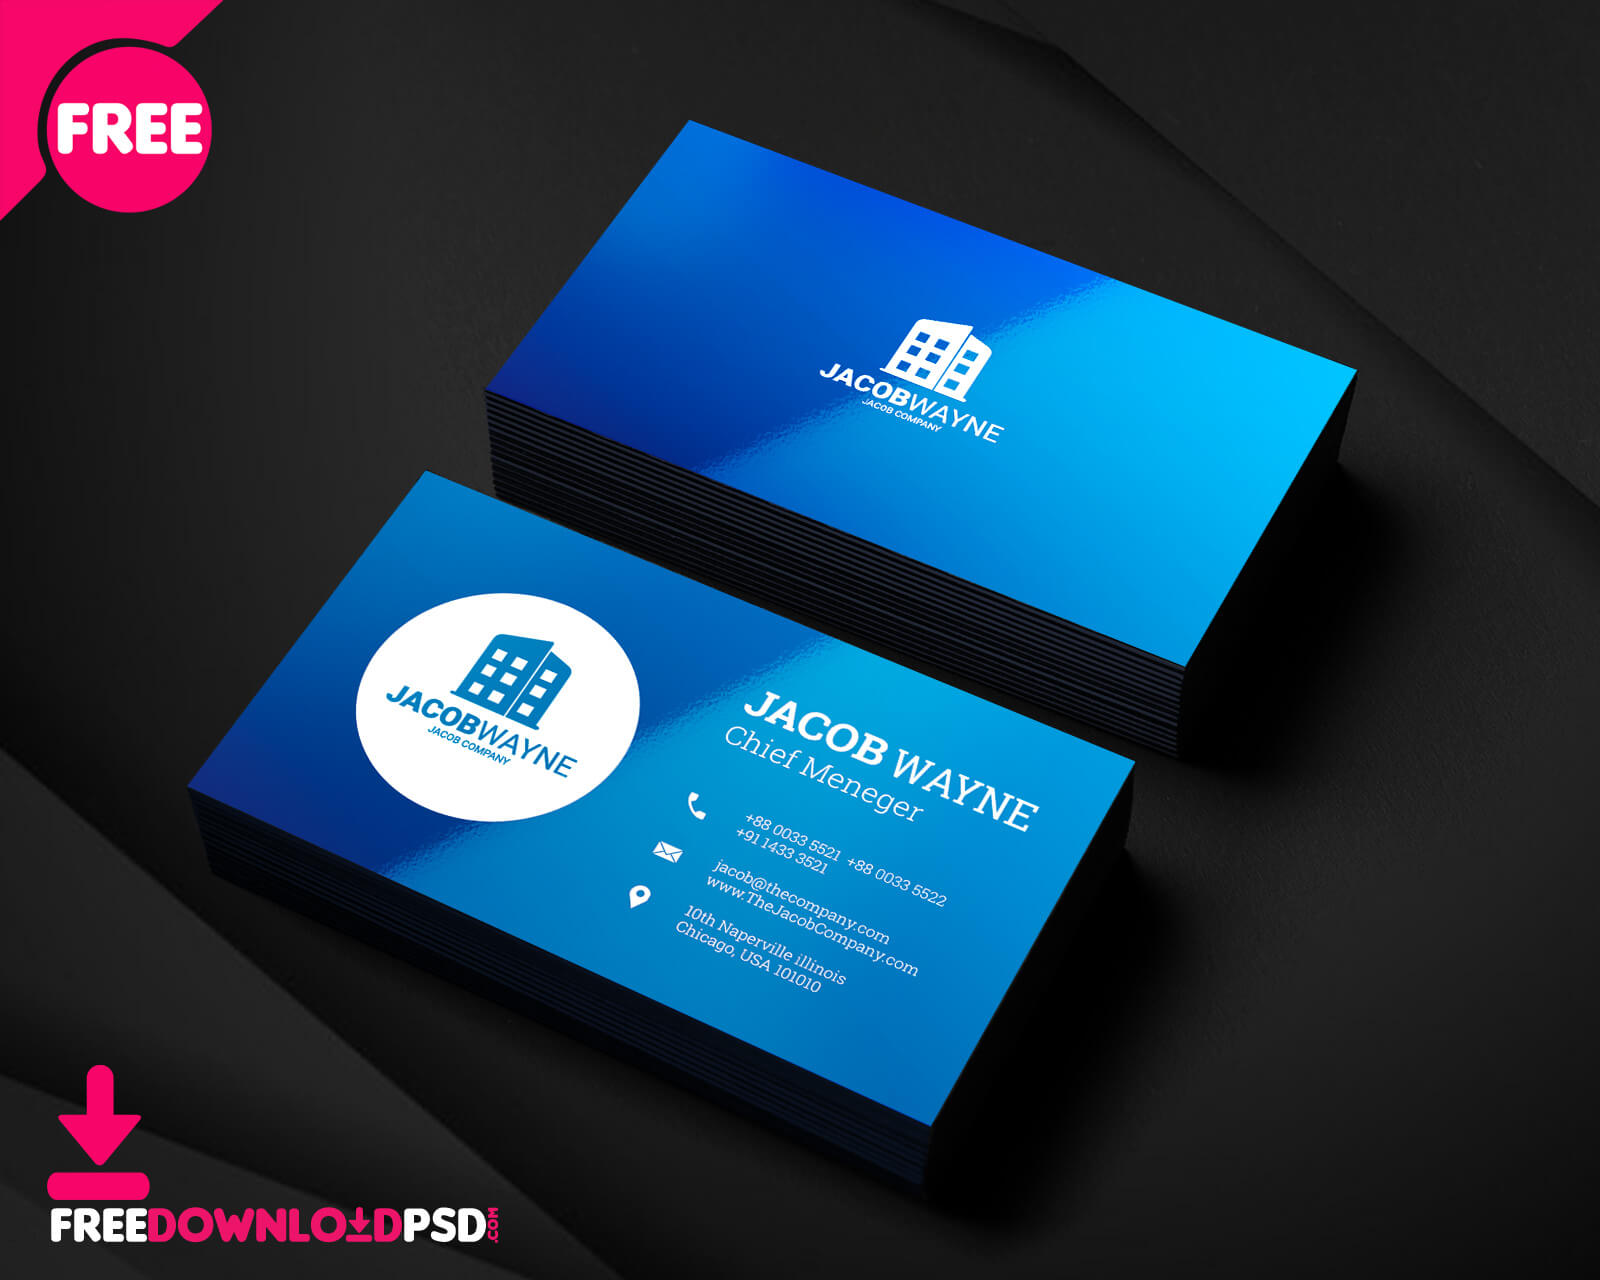 012 Photoshop Business Card Template Ideas Free Real Estate With Regard To Photoshop Business Card Template With Bleed